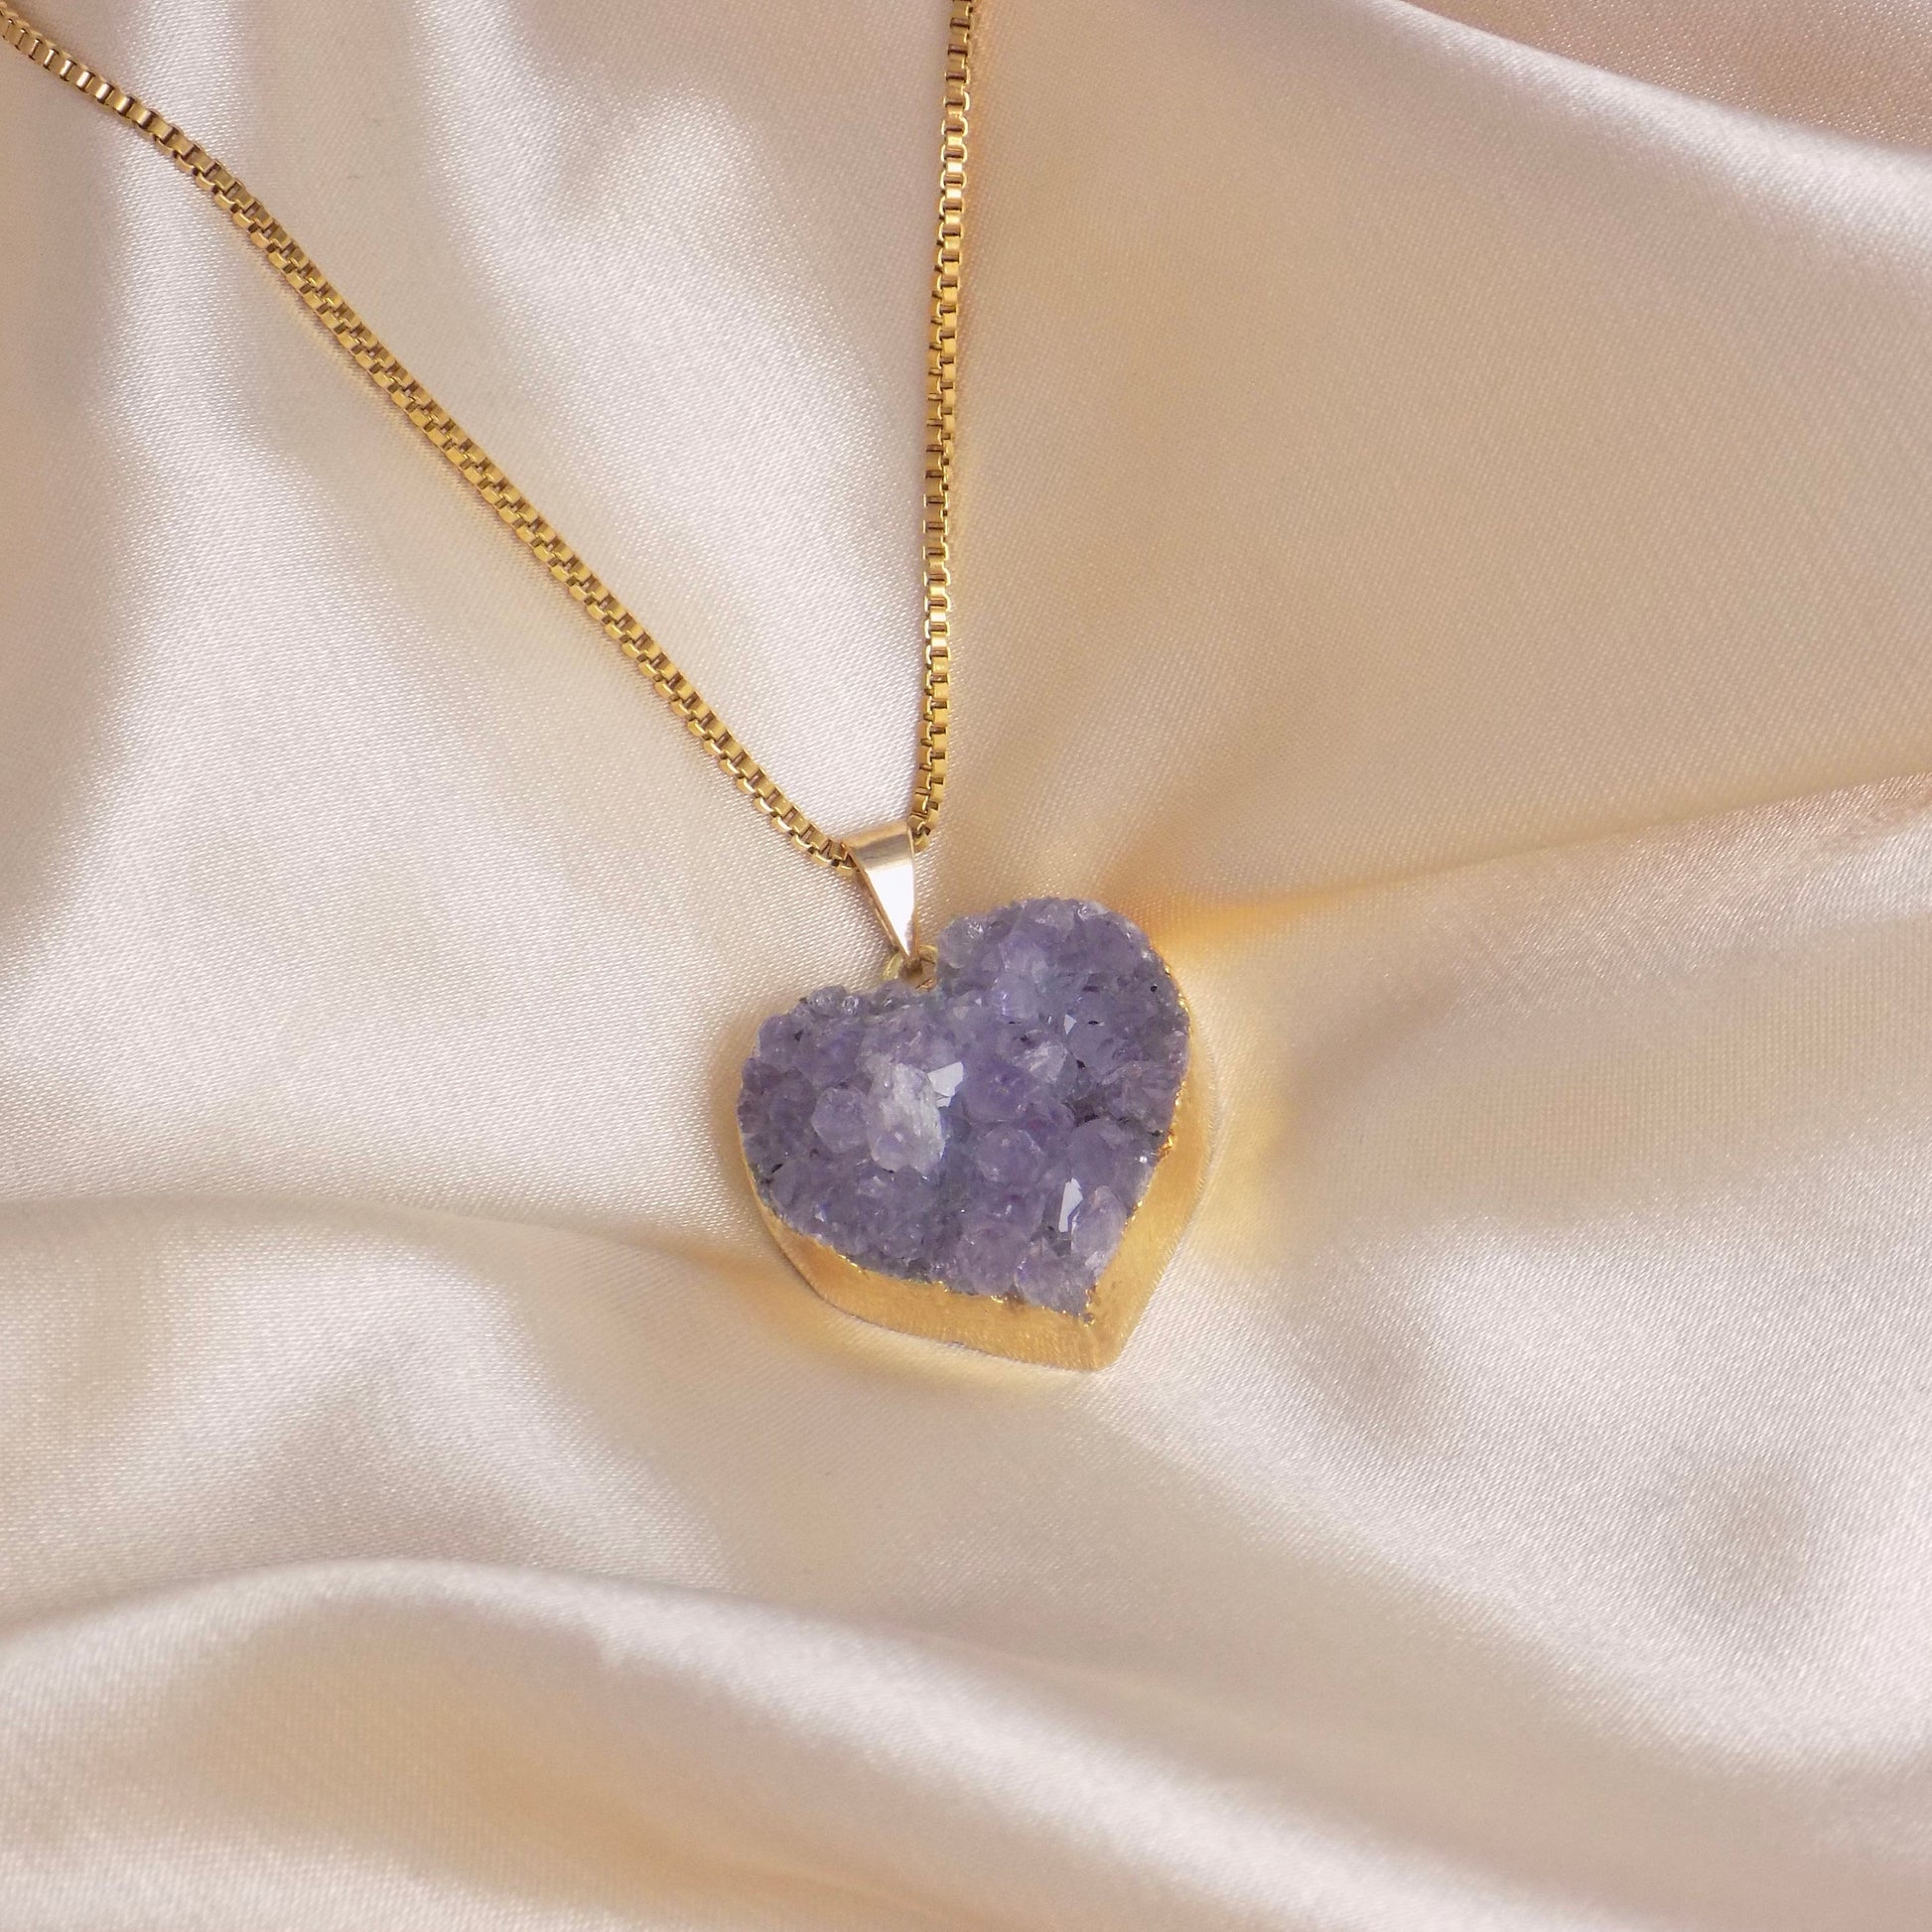 Amethyst Heart Necklace Gold, Box Chain 18K Gold Stainless Steel, Mom Gift, Wife Gift, Best Friend Gifts, G15-151